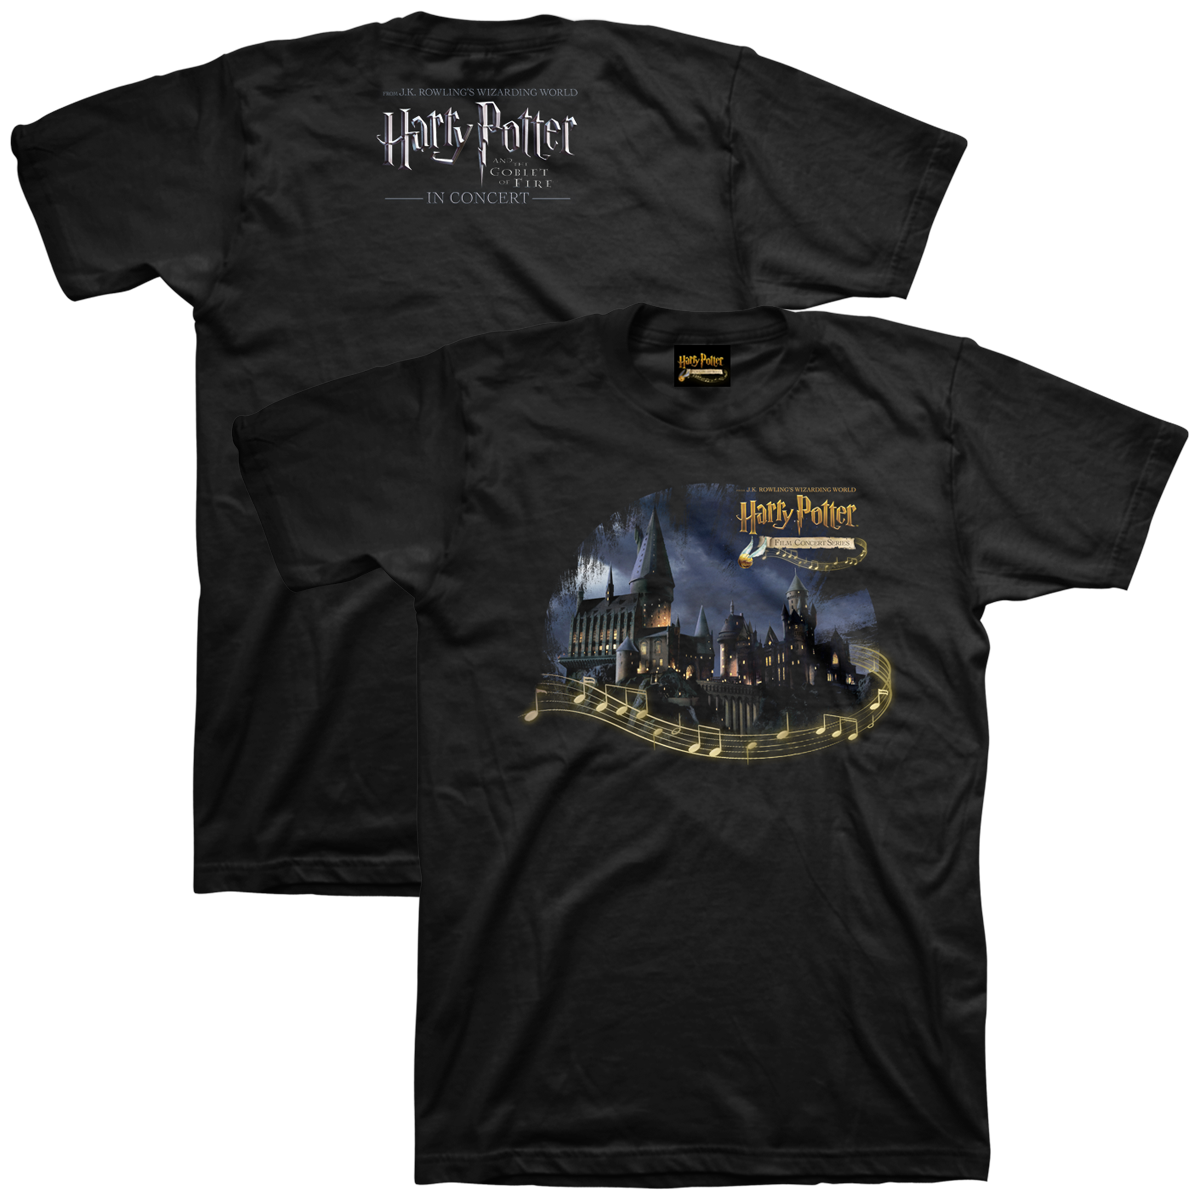 "Snowglobe" T-Shirt (from Harry Potter and the Goblet of Fire™ in Concert)